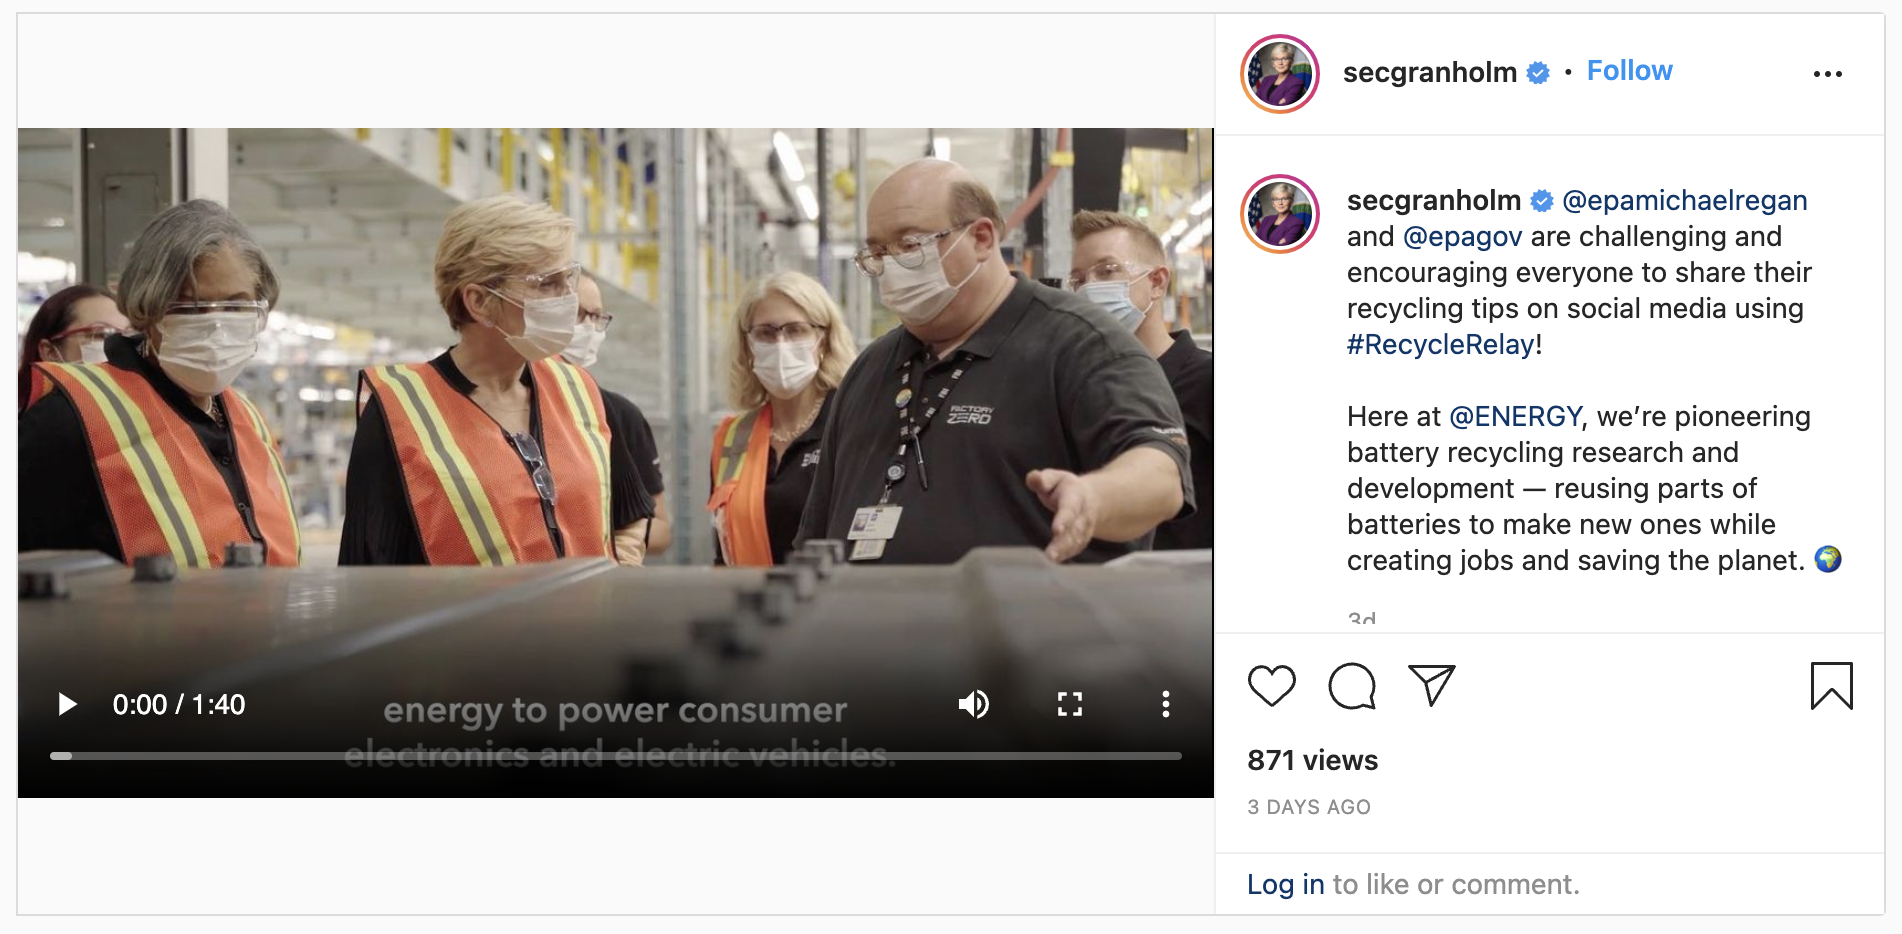 Instagram post from Secretary Granholm about battery recycling